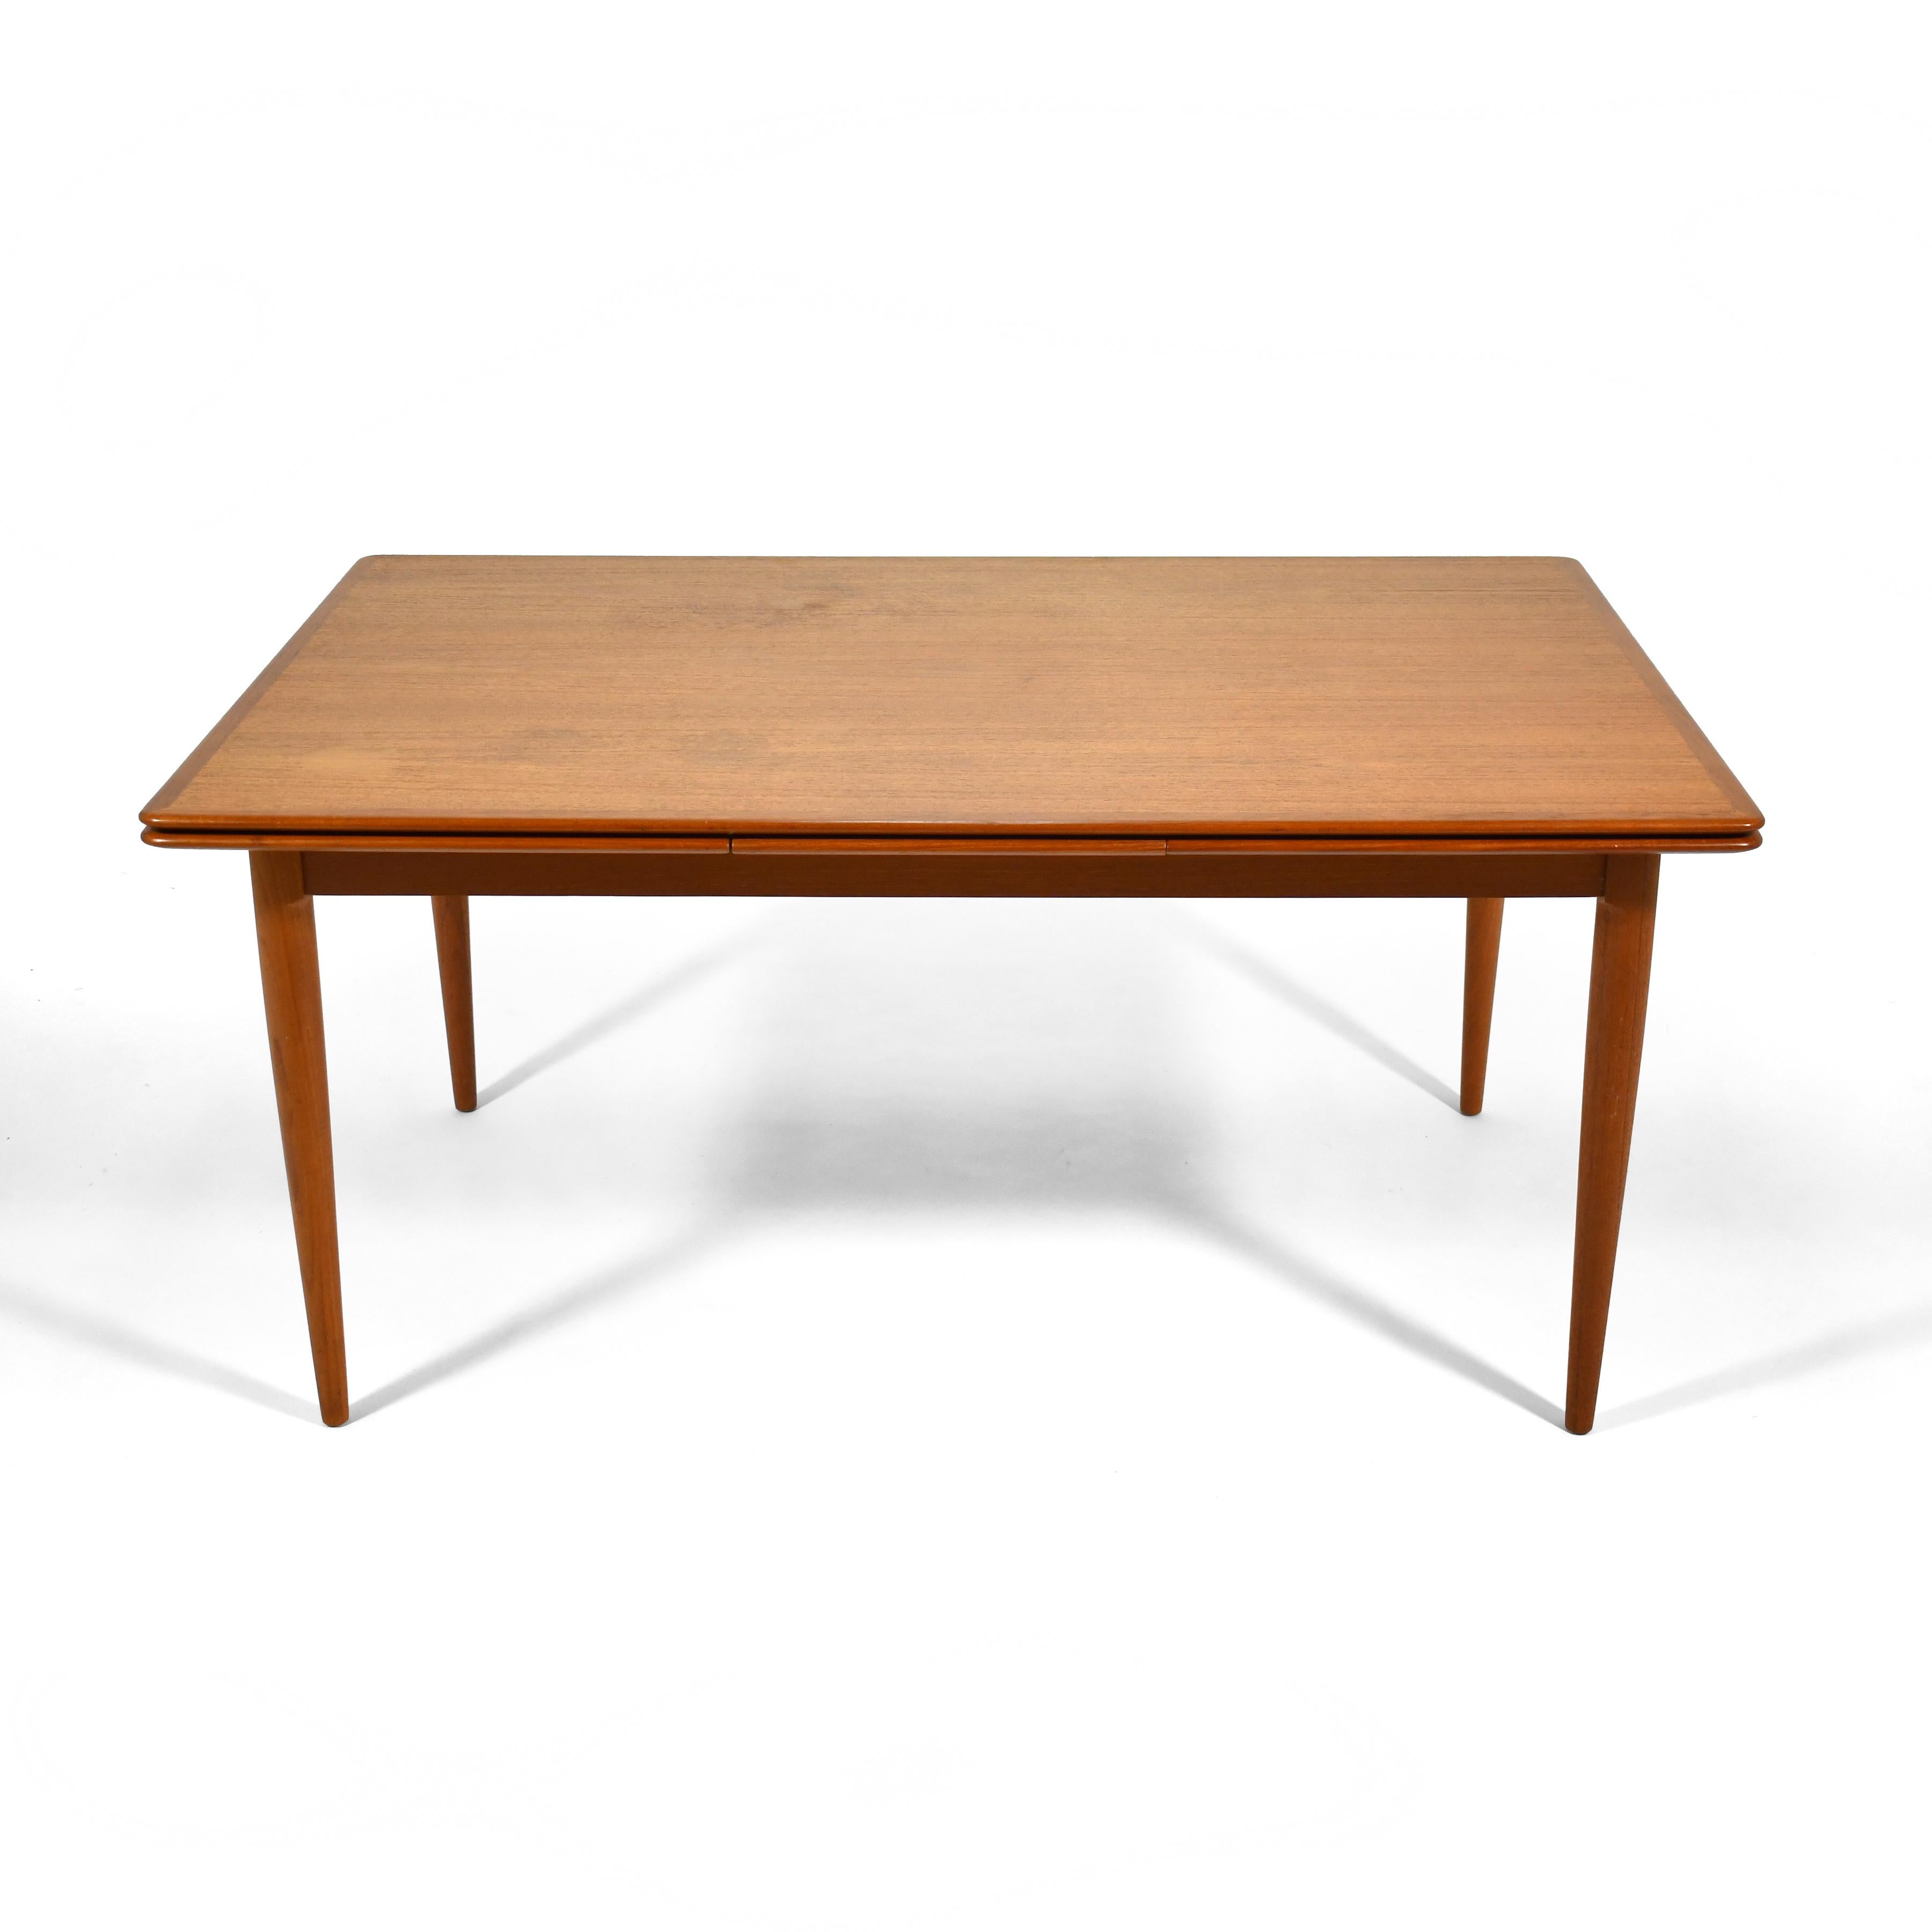 This teak dining table by Moreddi is a Danish design classic. Beautifully detailed and constructed, the versatile table has two leaves which slide smoothly from underneath the top, expanding the length by over 43